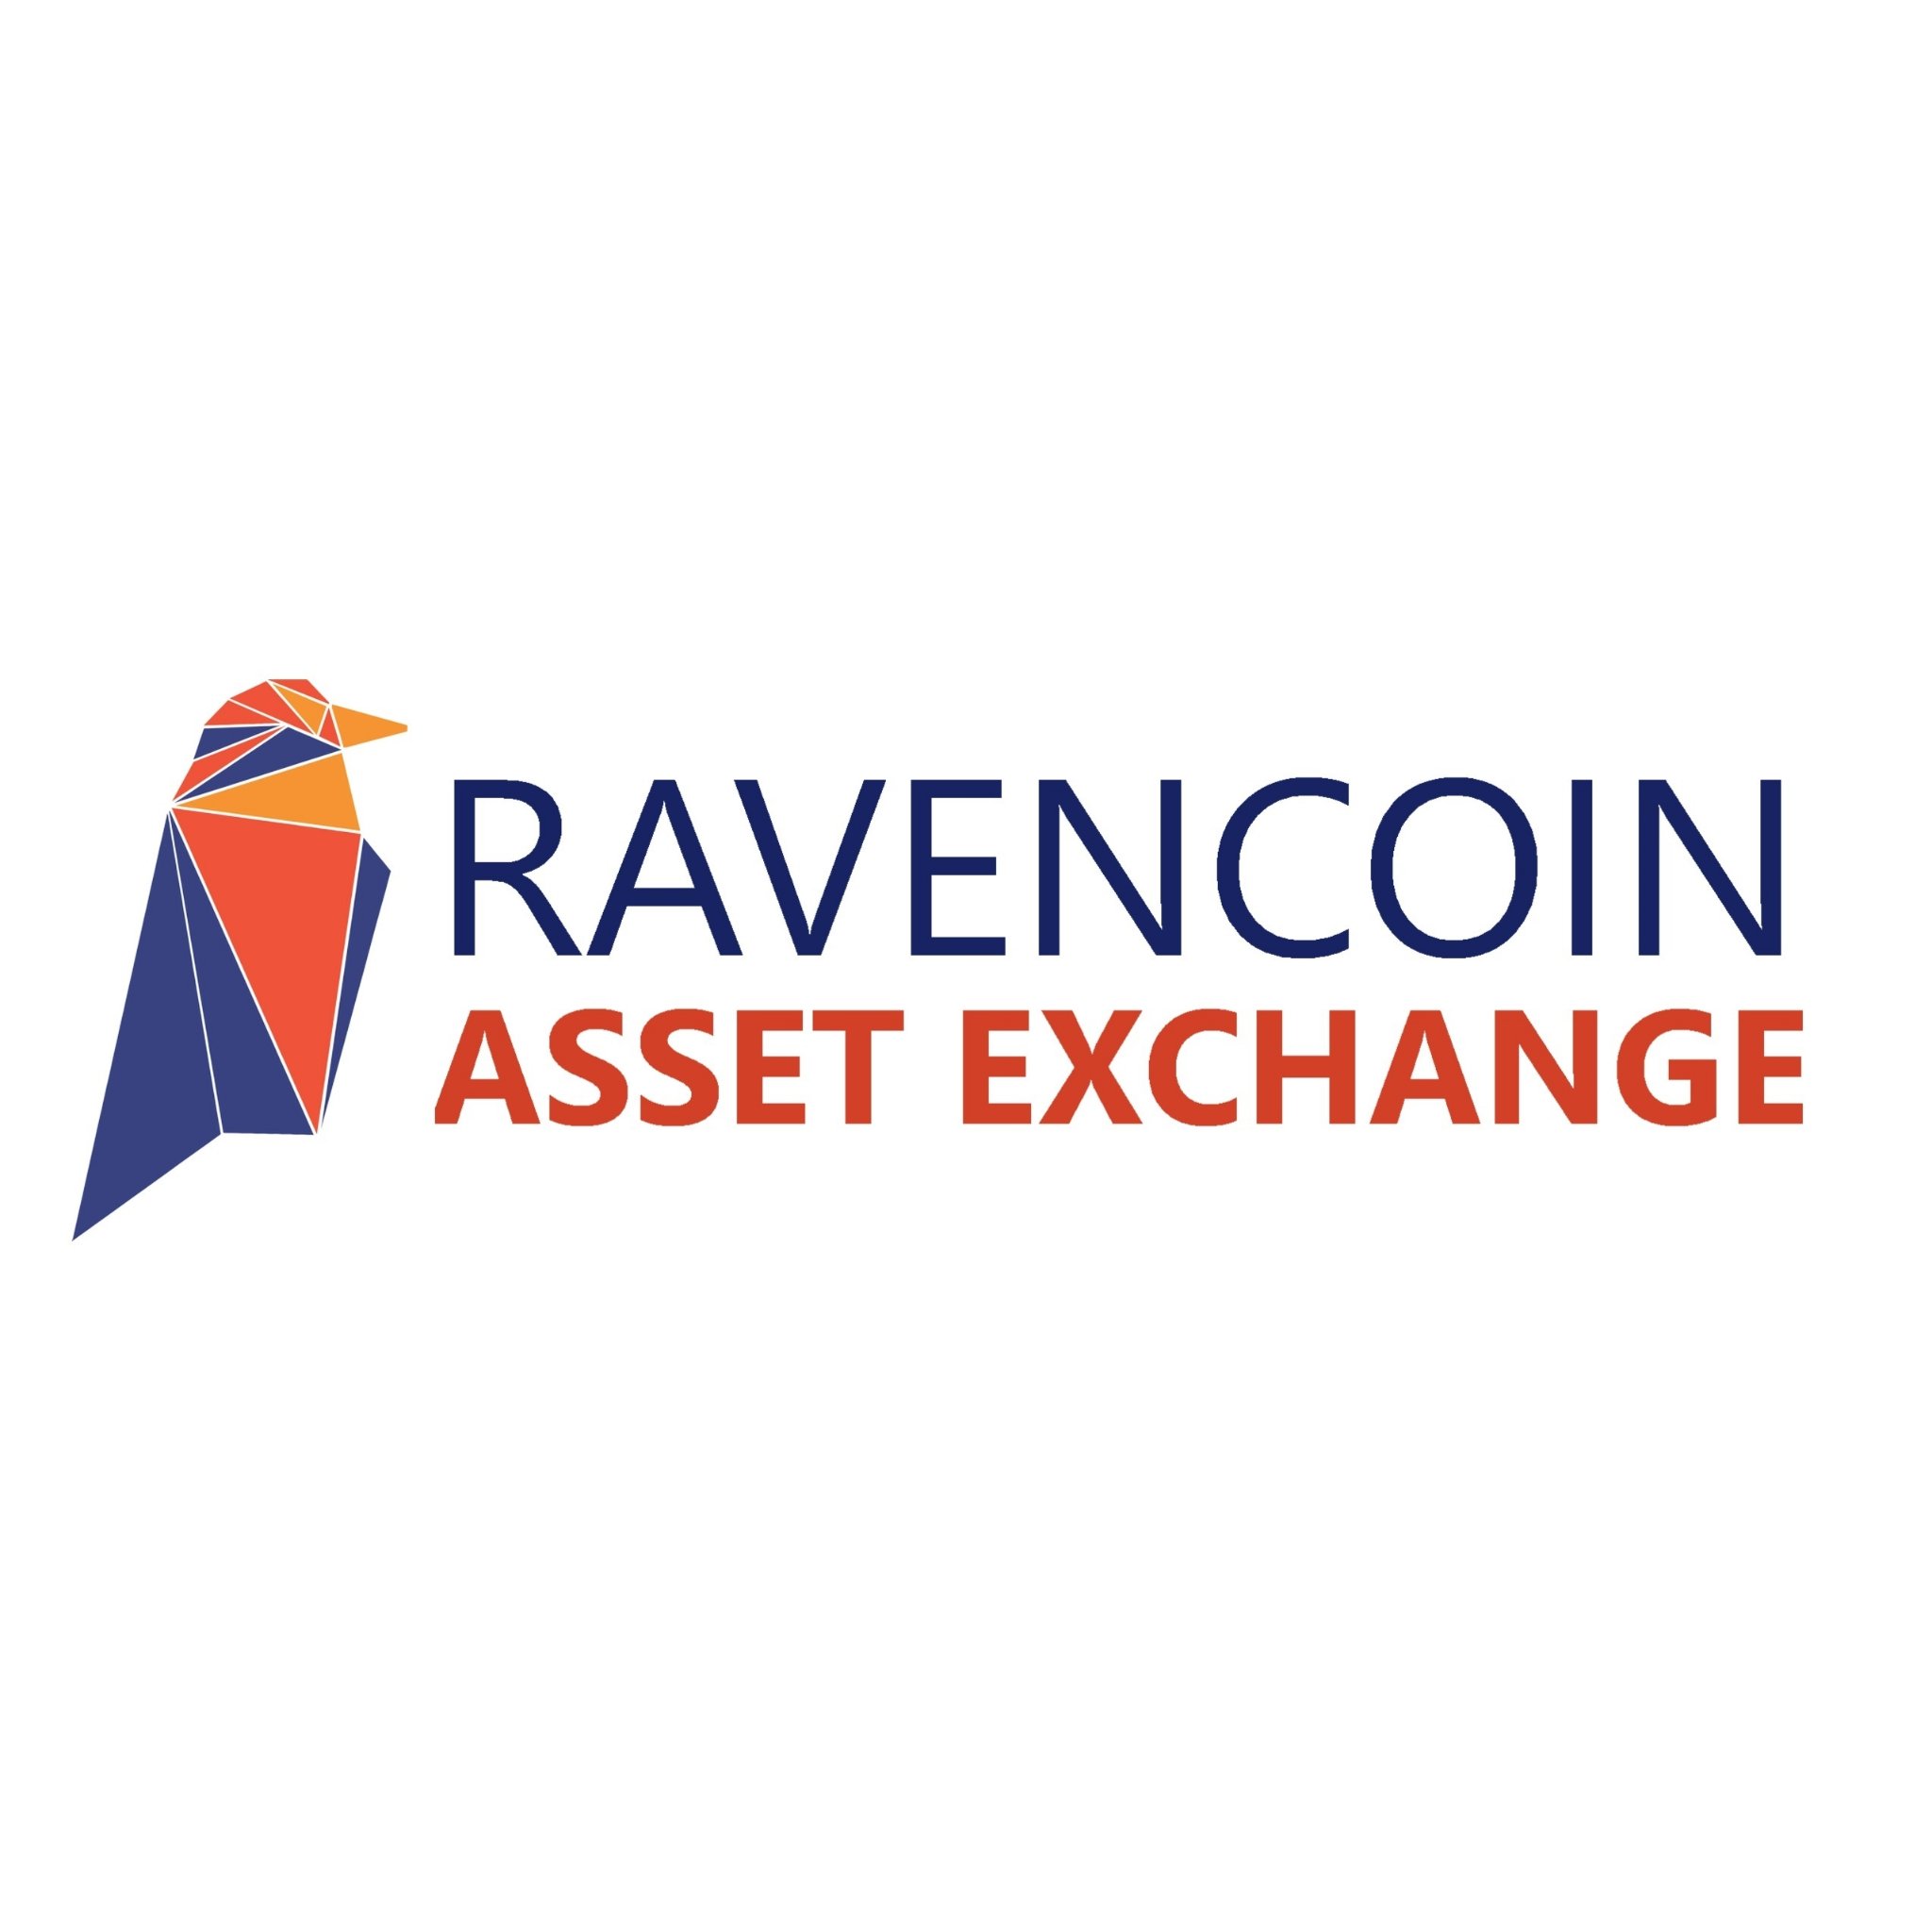 List your #Ravencoin based asset for up to 4 months free! Negotiate, sell, or trade with interested parties.